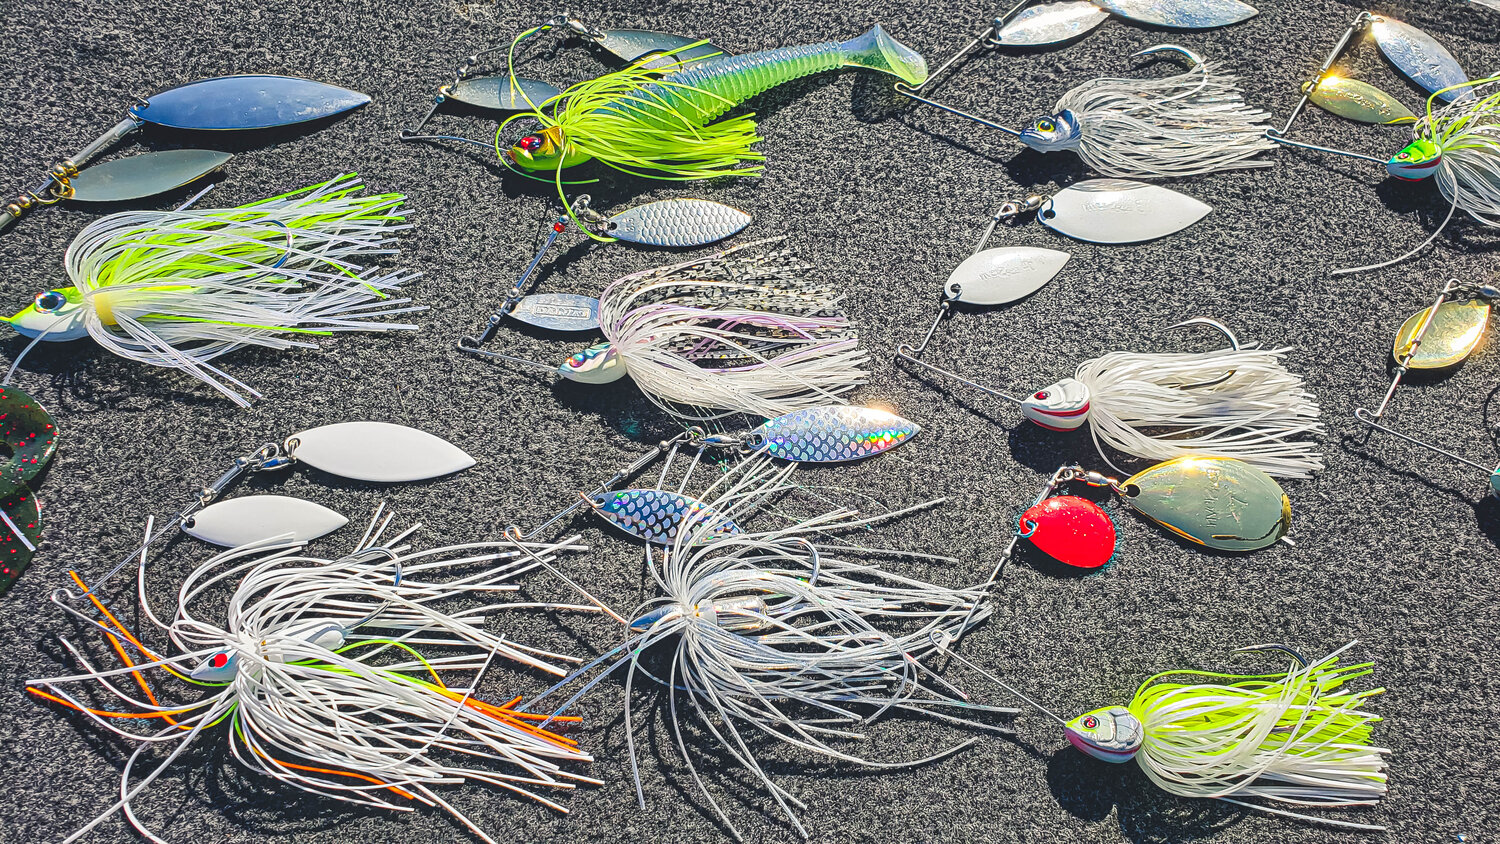 The Best Chatterbait and Spinnerbaits Tricks You've Never Tried